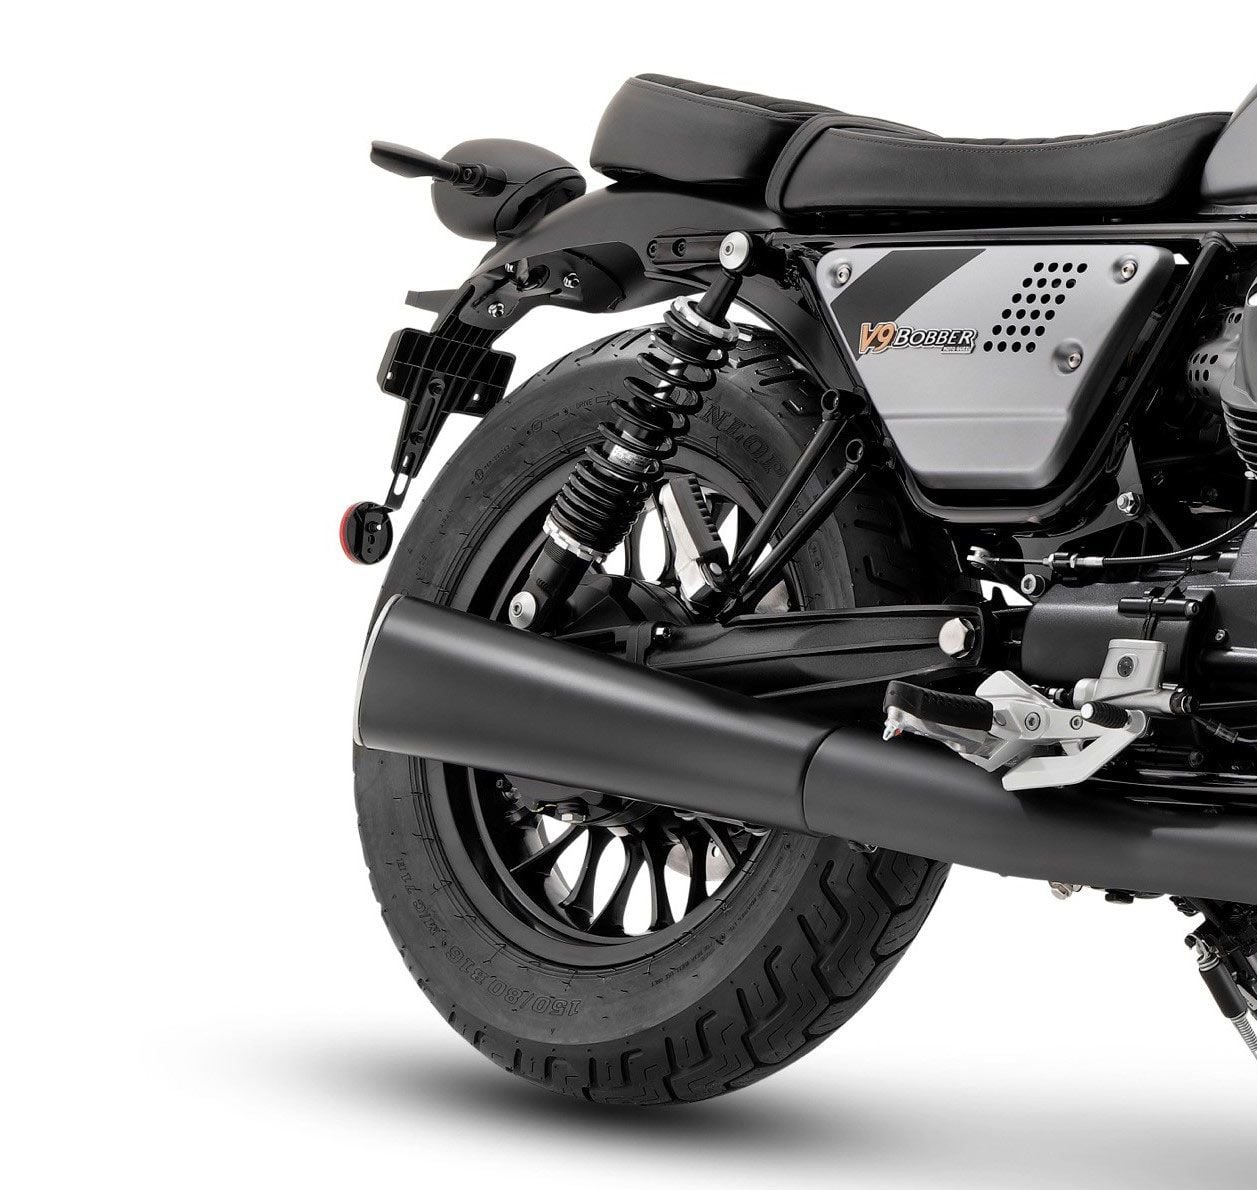 The V9 Bobber Special Edition also features a new street-legal slip-on muffler, painted black.